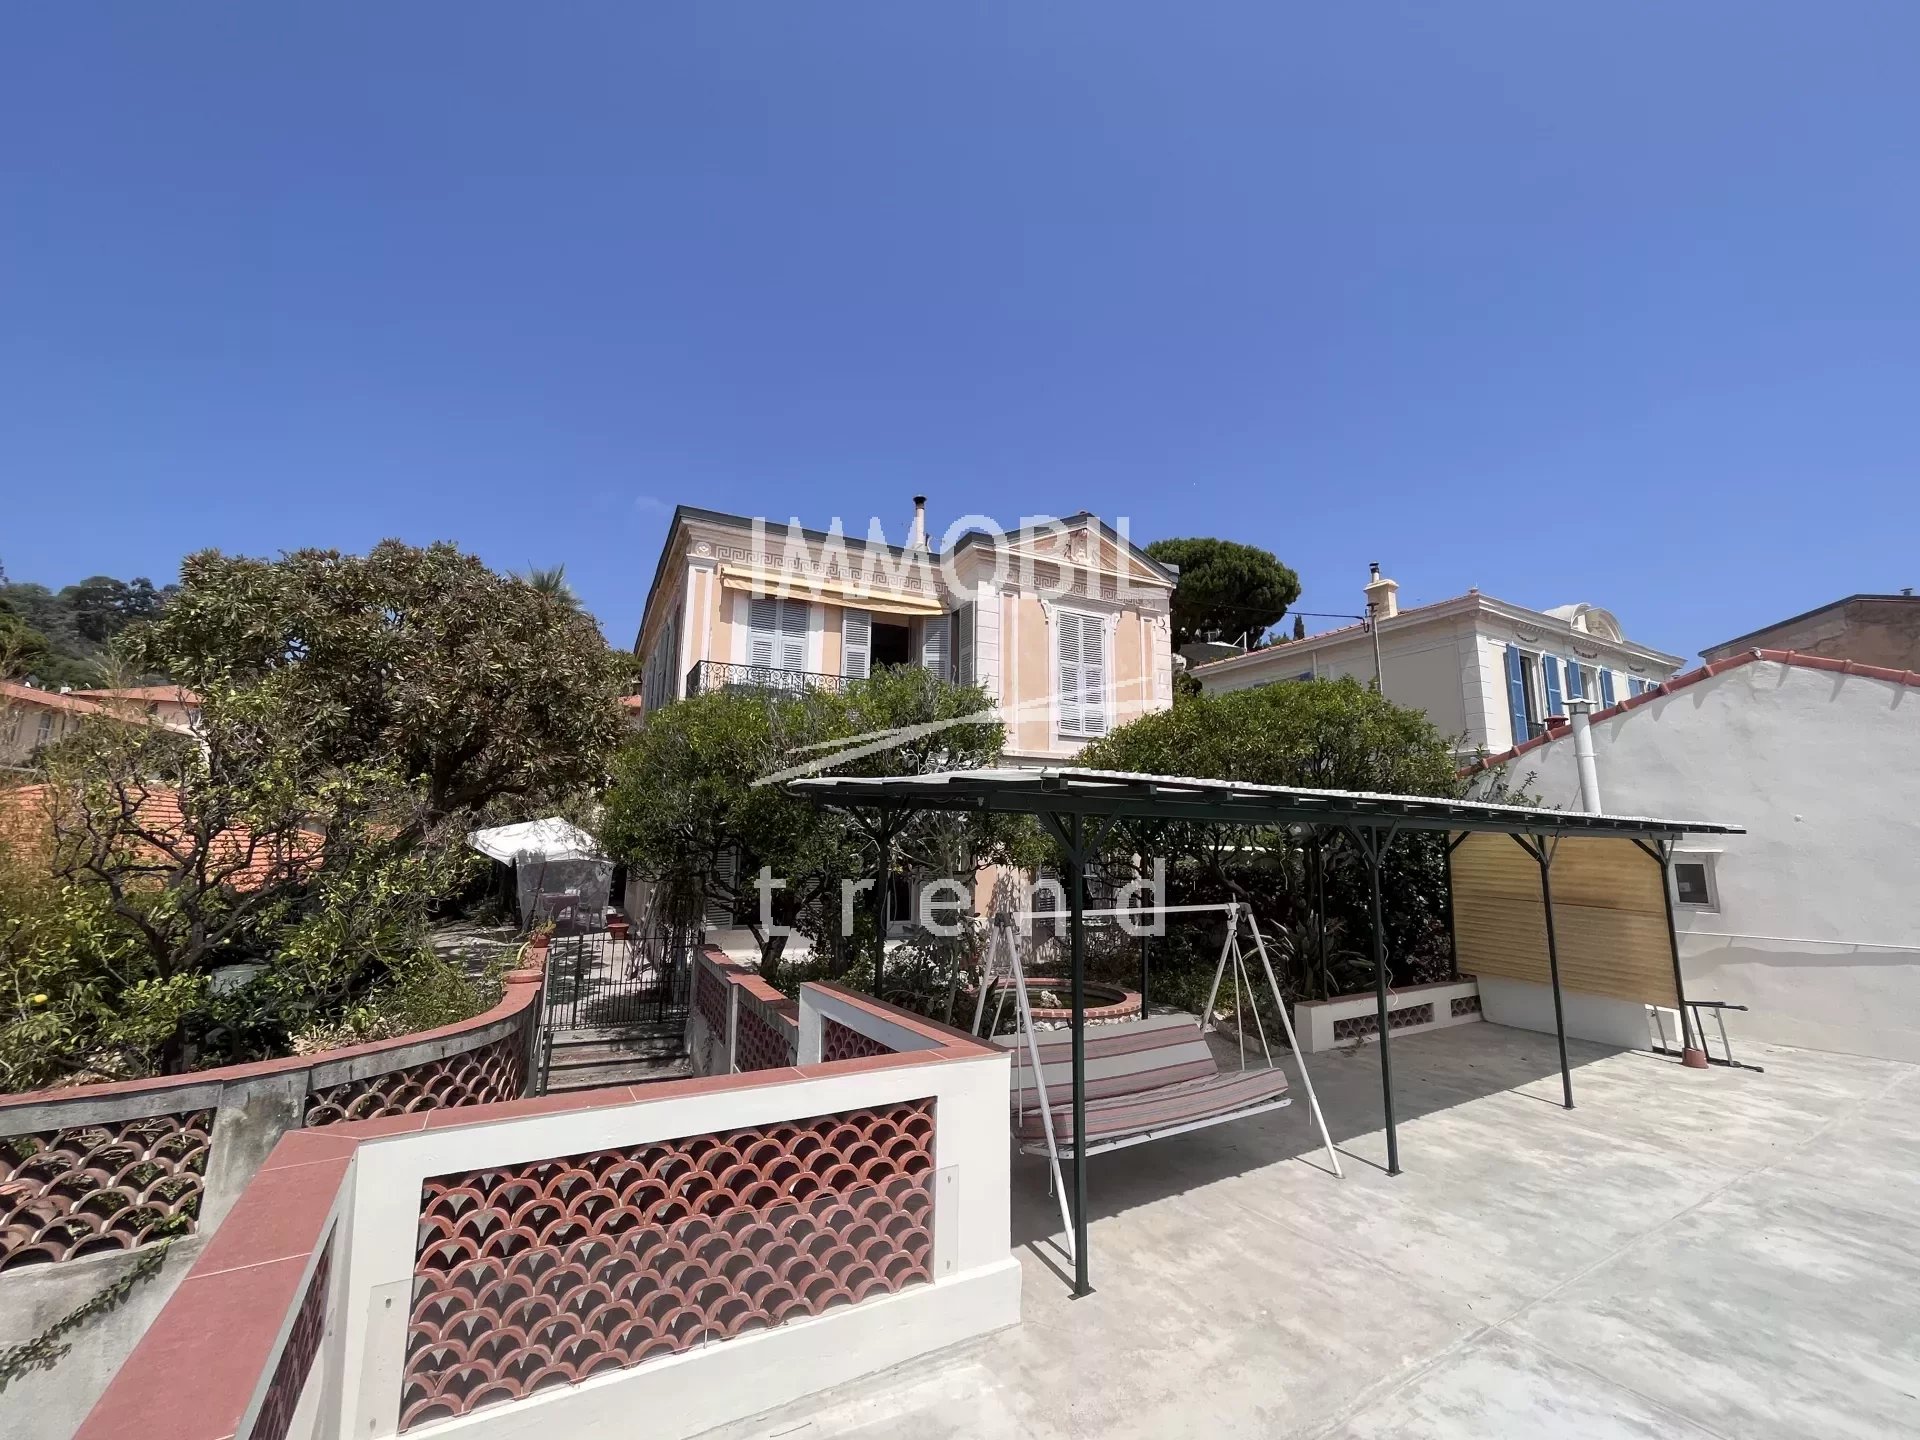 REAL ESTATE MENTON NEAR CENTER TOWN, PANORAMIC SEA VIEW, CARACTERISTIC VILLA  OF 9 ROOMS, GUEST HOUSE, GARDEN, TERRACE, BOX AND PARKING